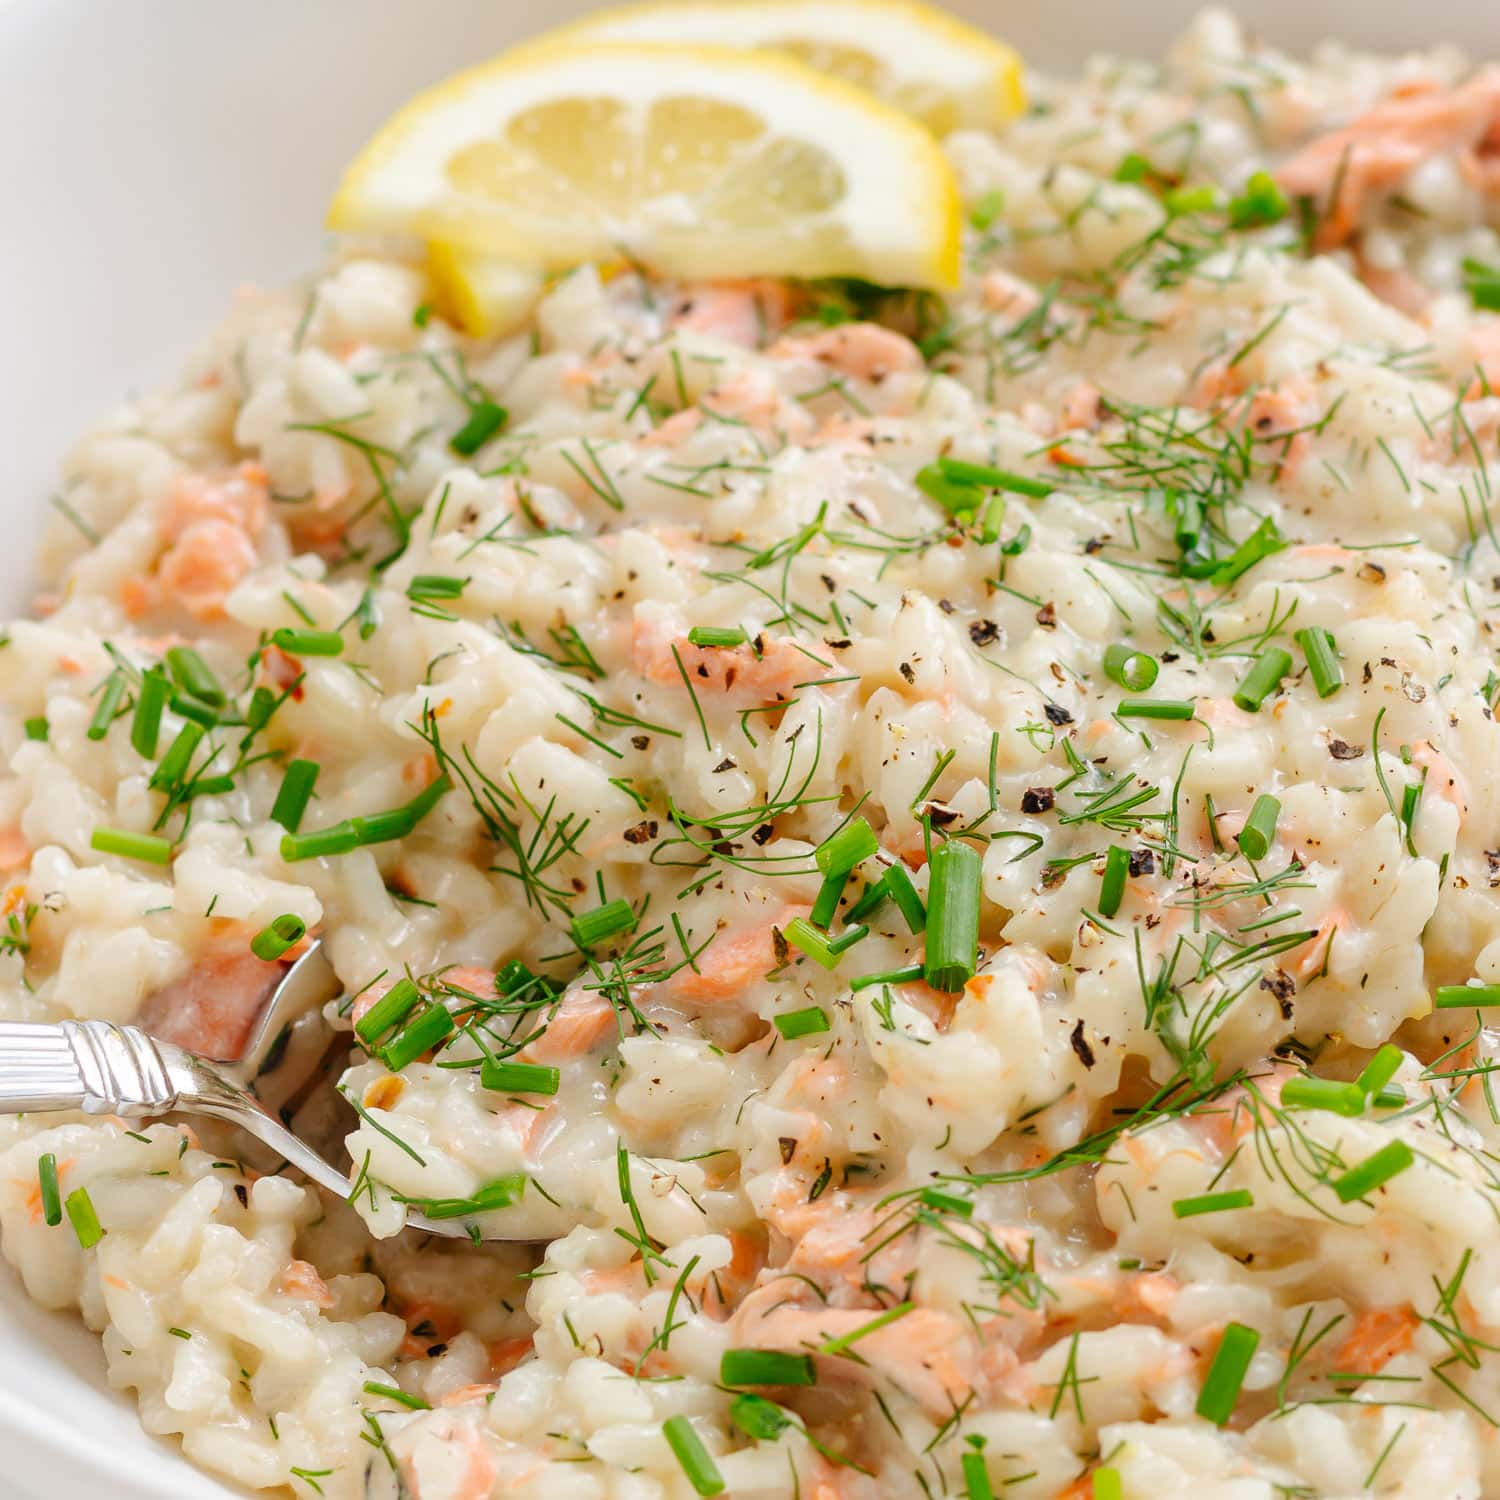 Salmon risotto garnished with lemon slices and chopped fresh dill and chives.